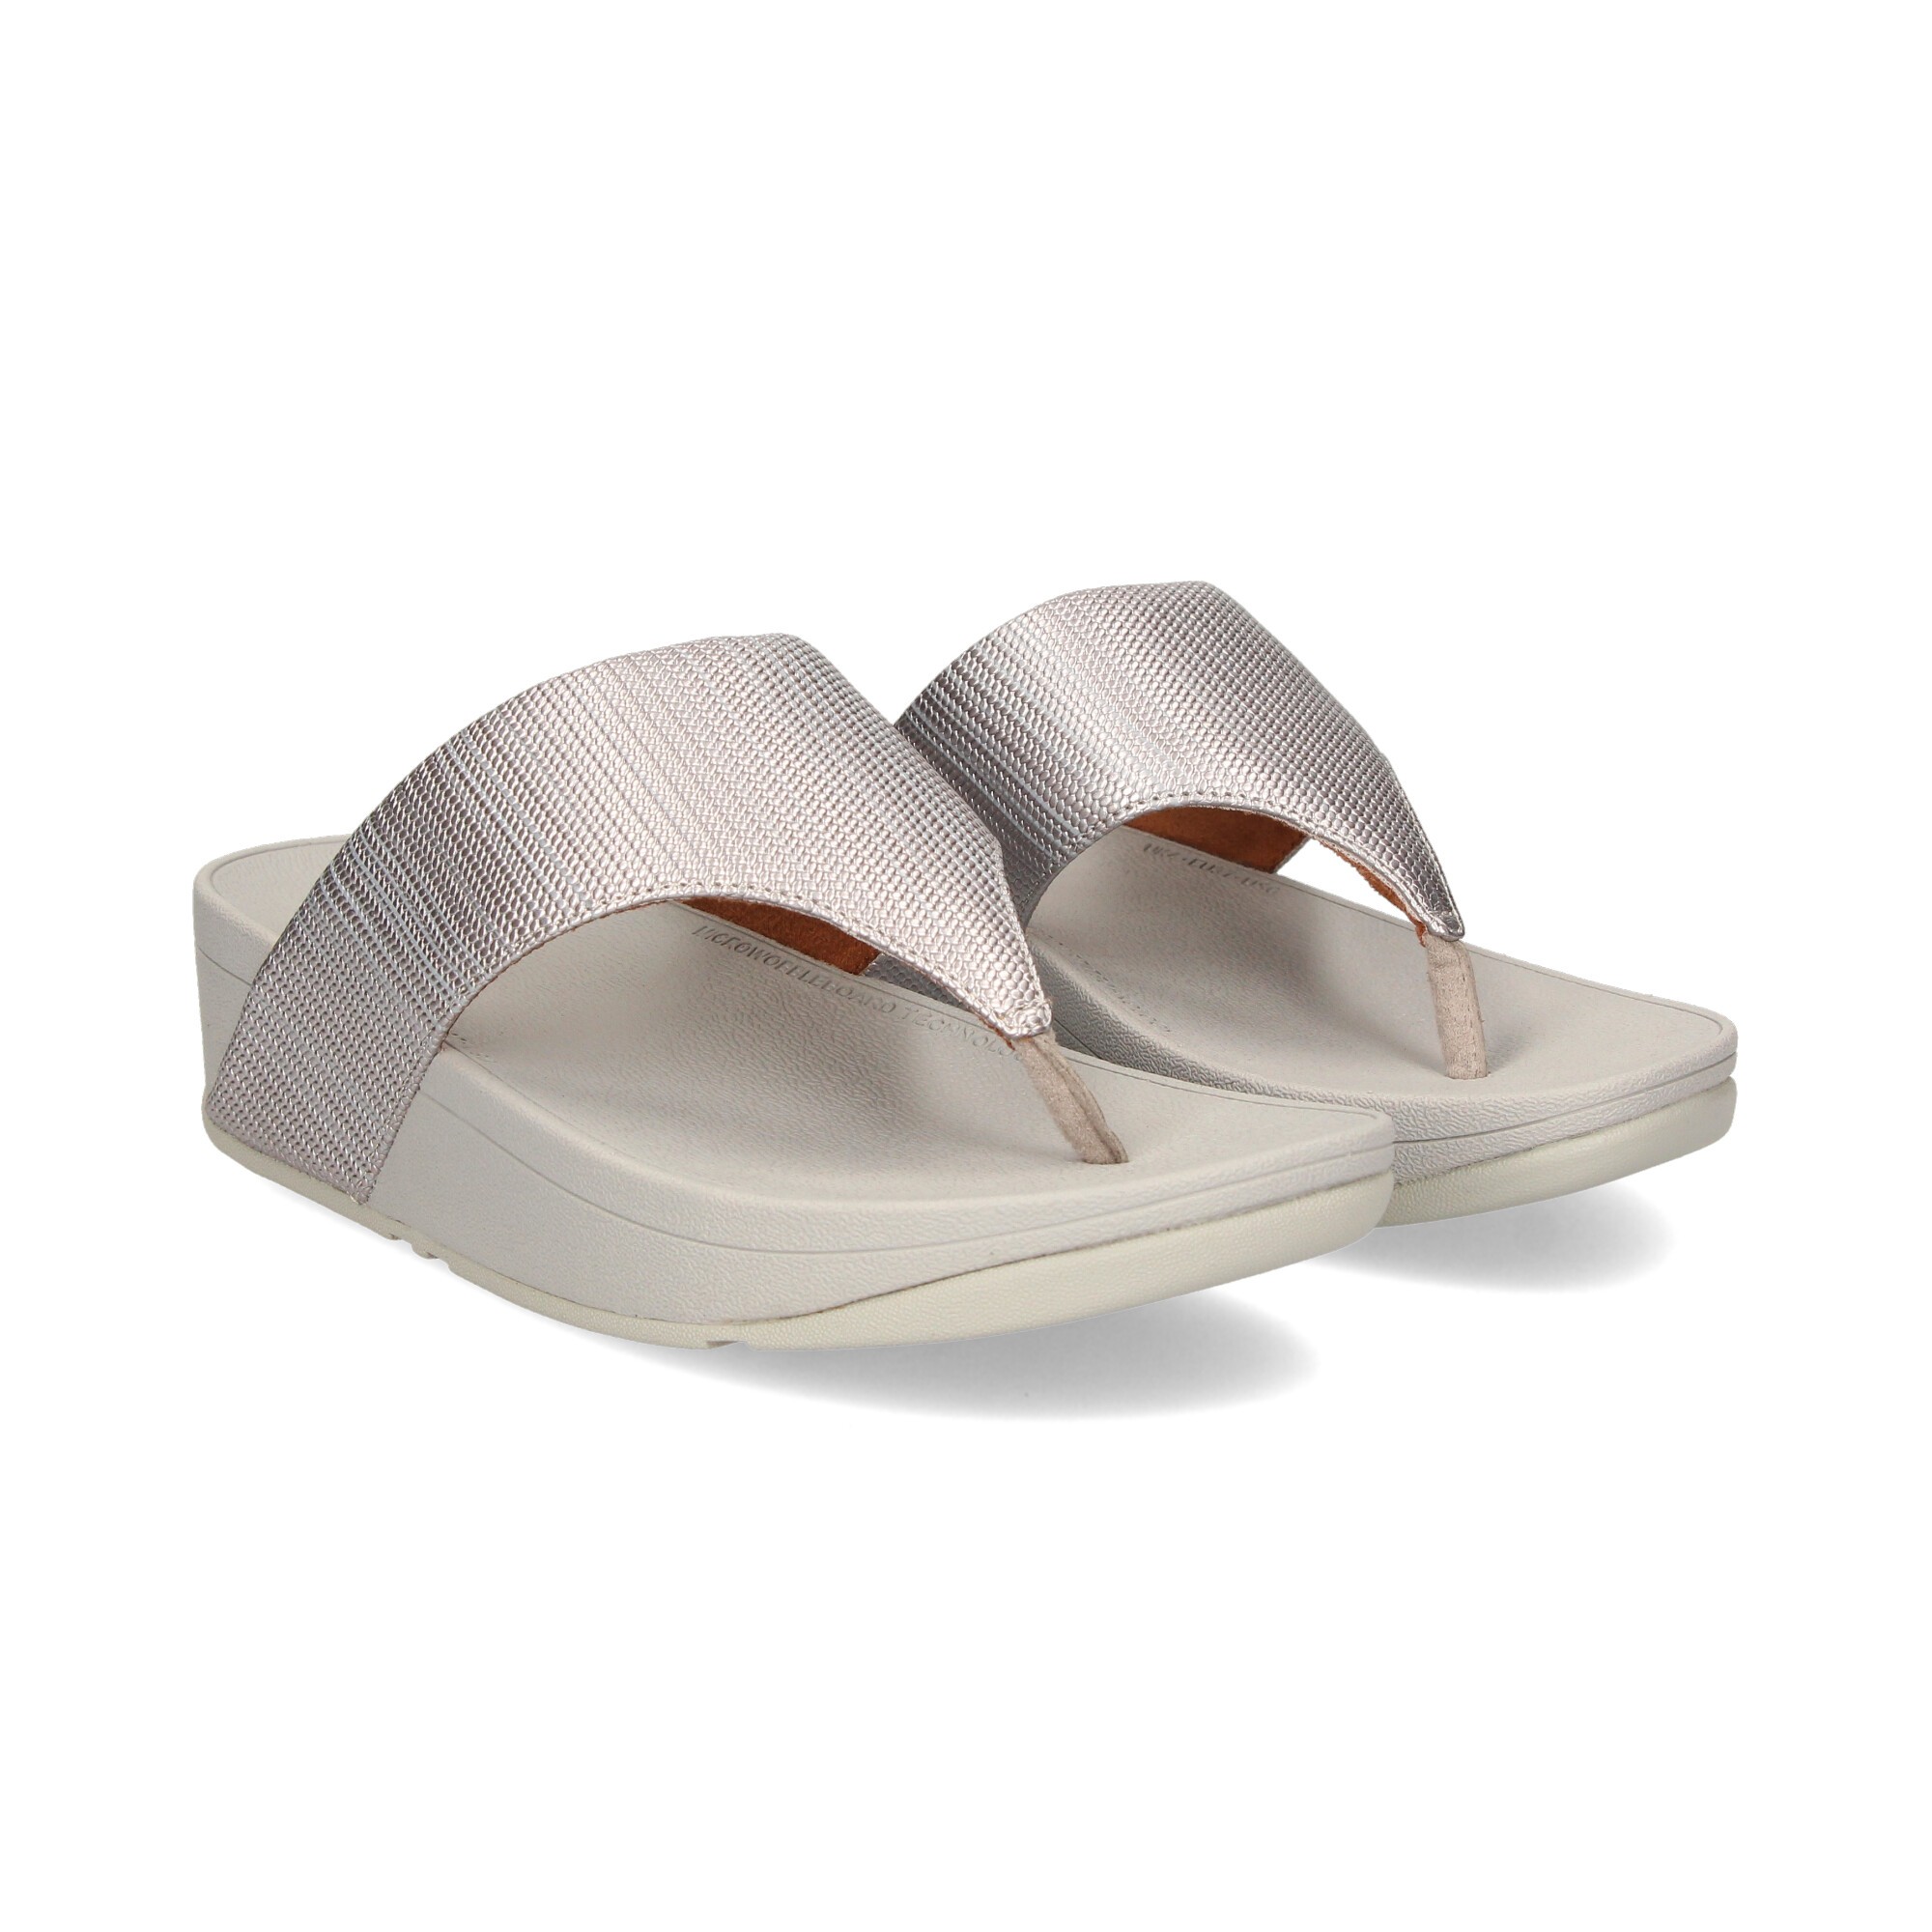 FITFLOP Sandalias de Mujer OLIVE SILVER